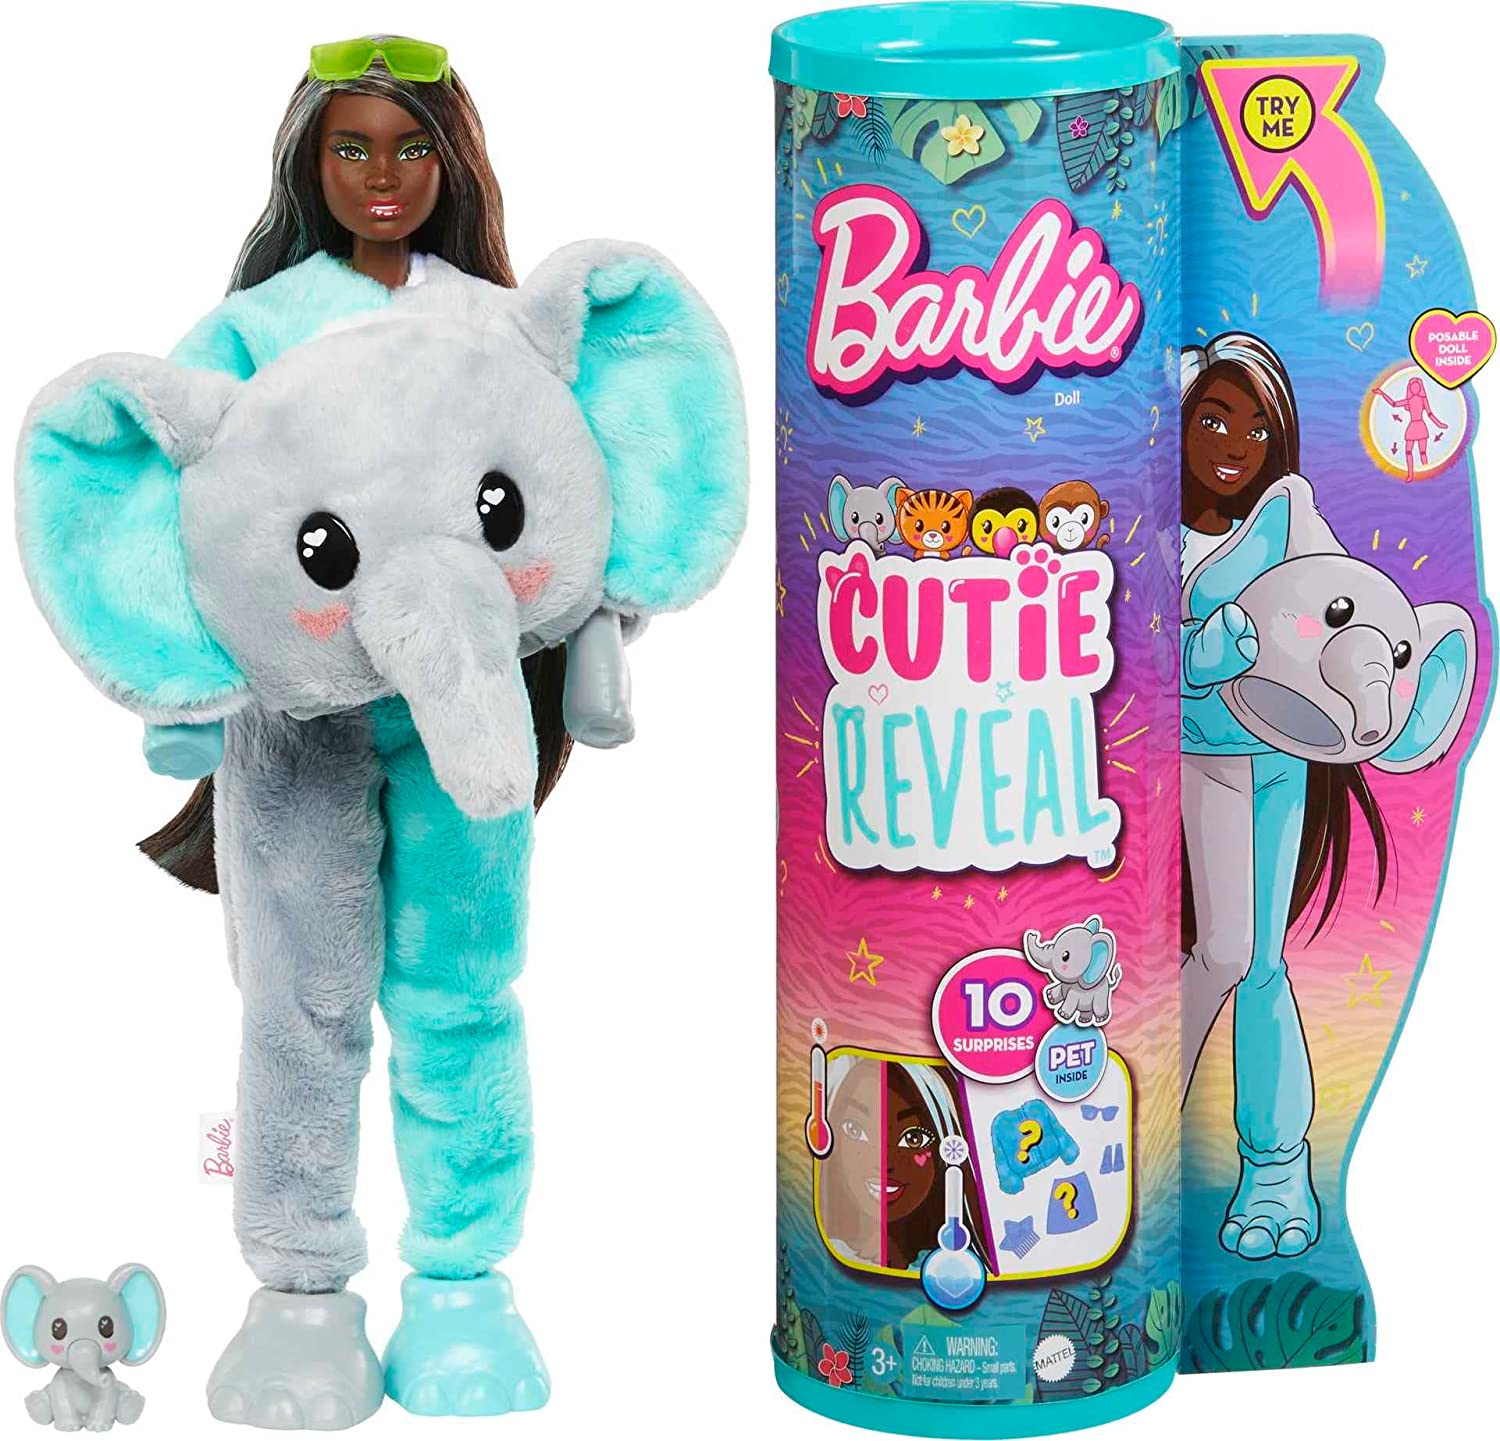 Awesome Barbie Cutie Reveal Jungle Series of the decade Access here ...